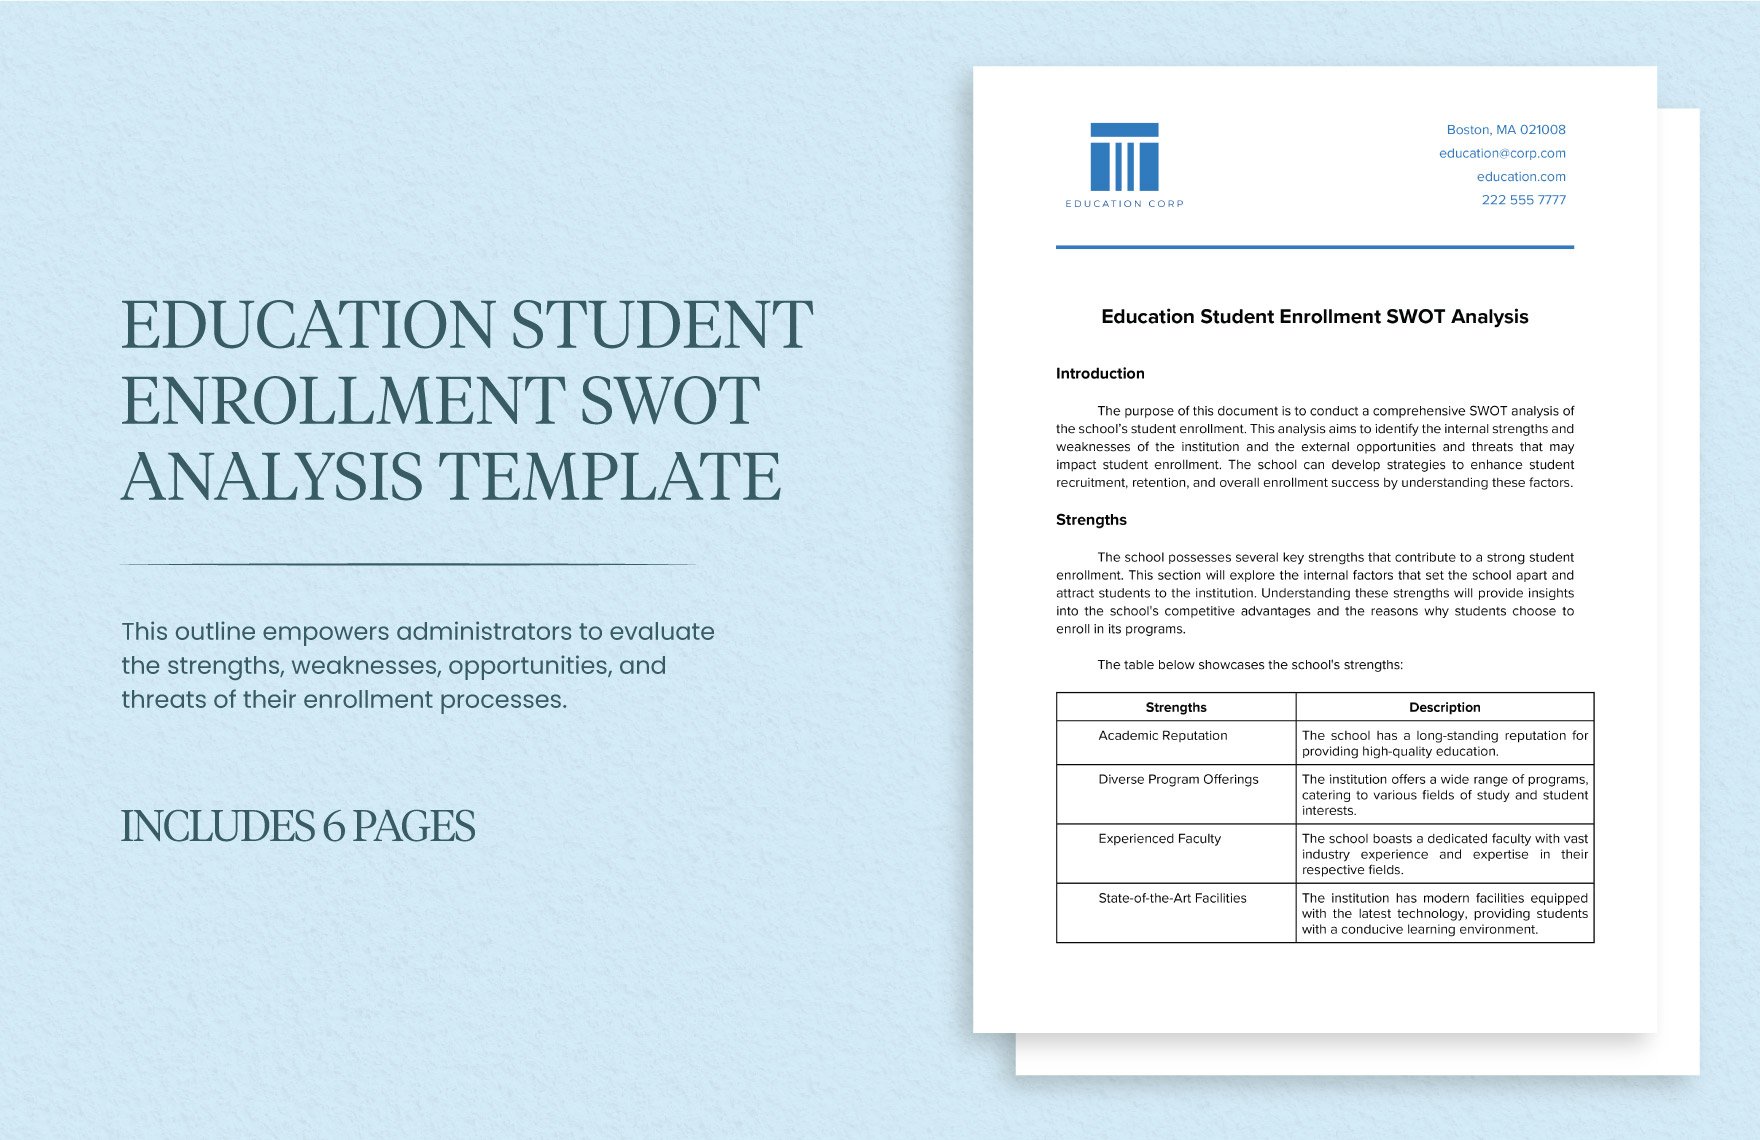 Education Student Enrollment SWOT Analysis Template